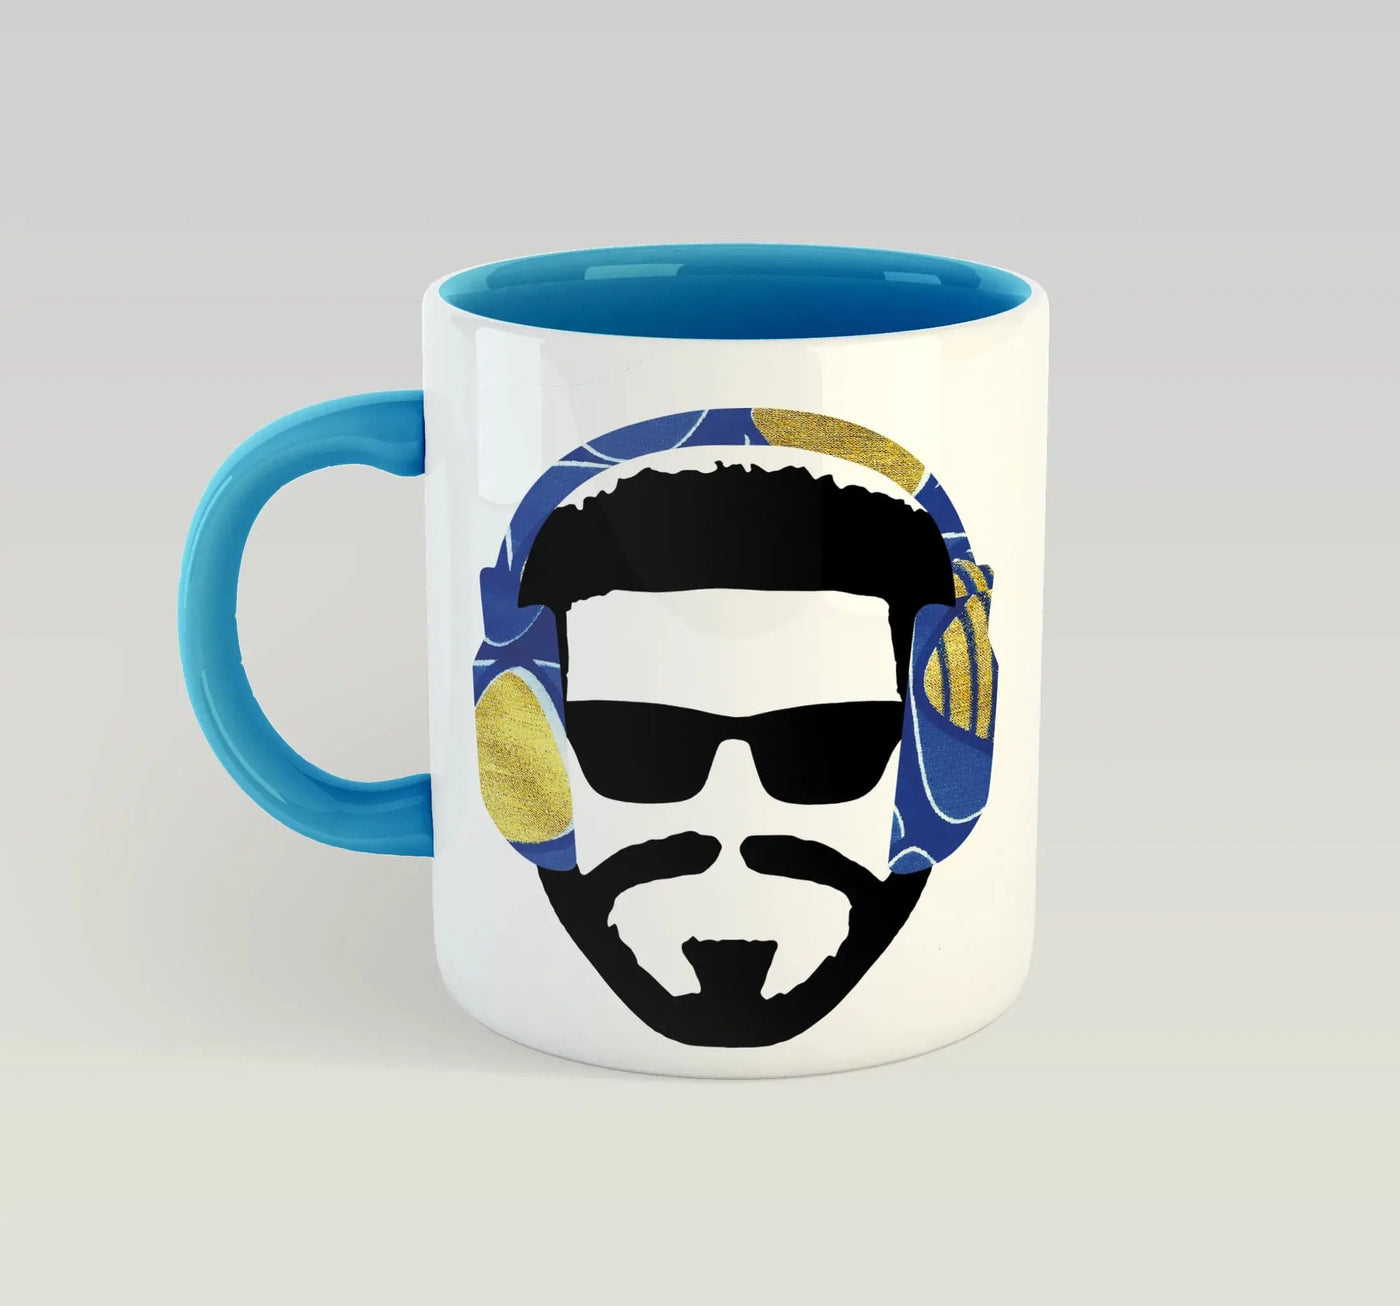 Music Man Mug by Afrotouch - Blue - Migration Museum Shop